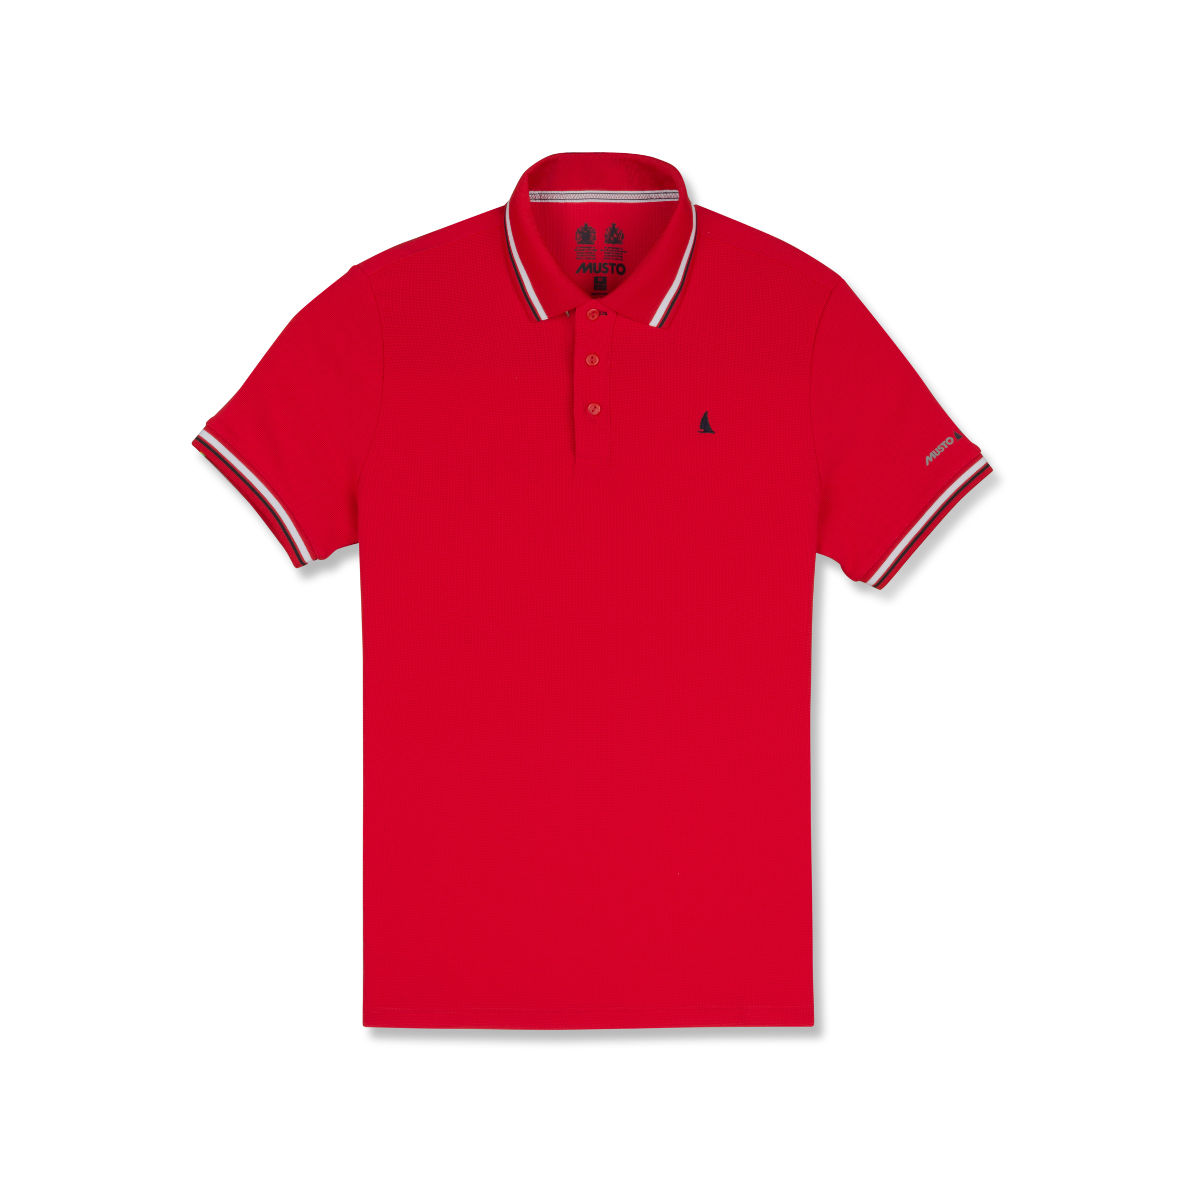 Musto Evolution Pro Lite polo homme rouge, taille S